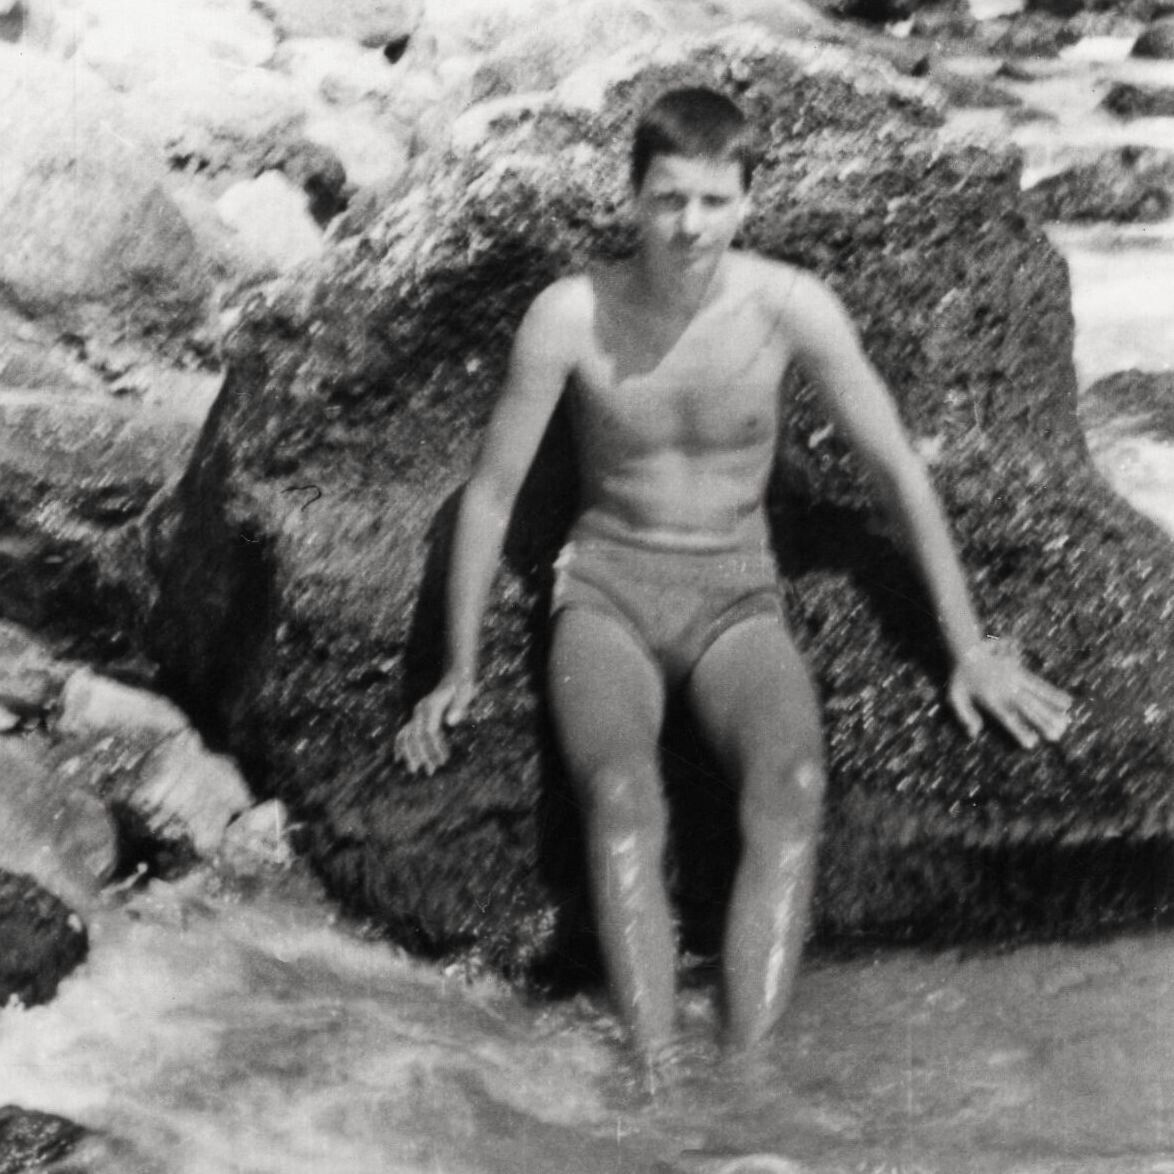 Vintage gay int photo handsome guy slender young man swimming beach bulge +7144